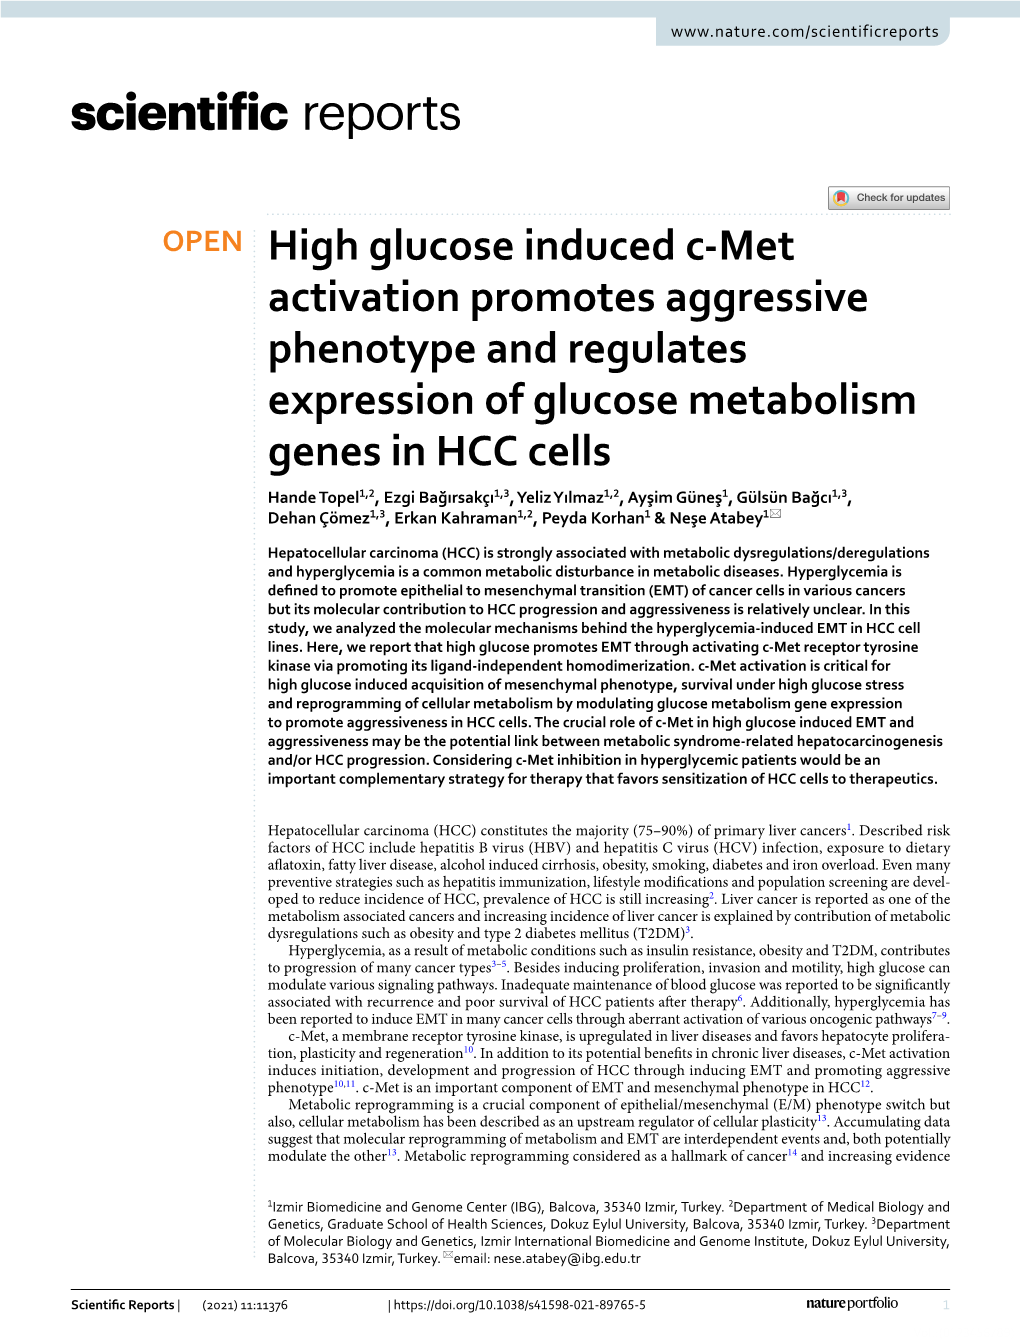 High Glucose Induced C-Met Activation Promotes Aggressive Phenotype